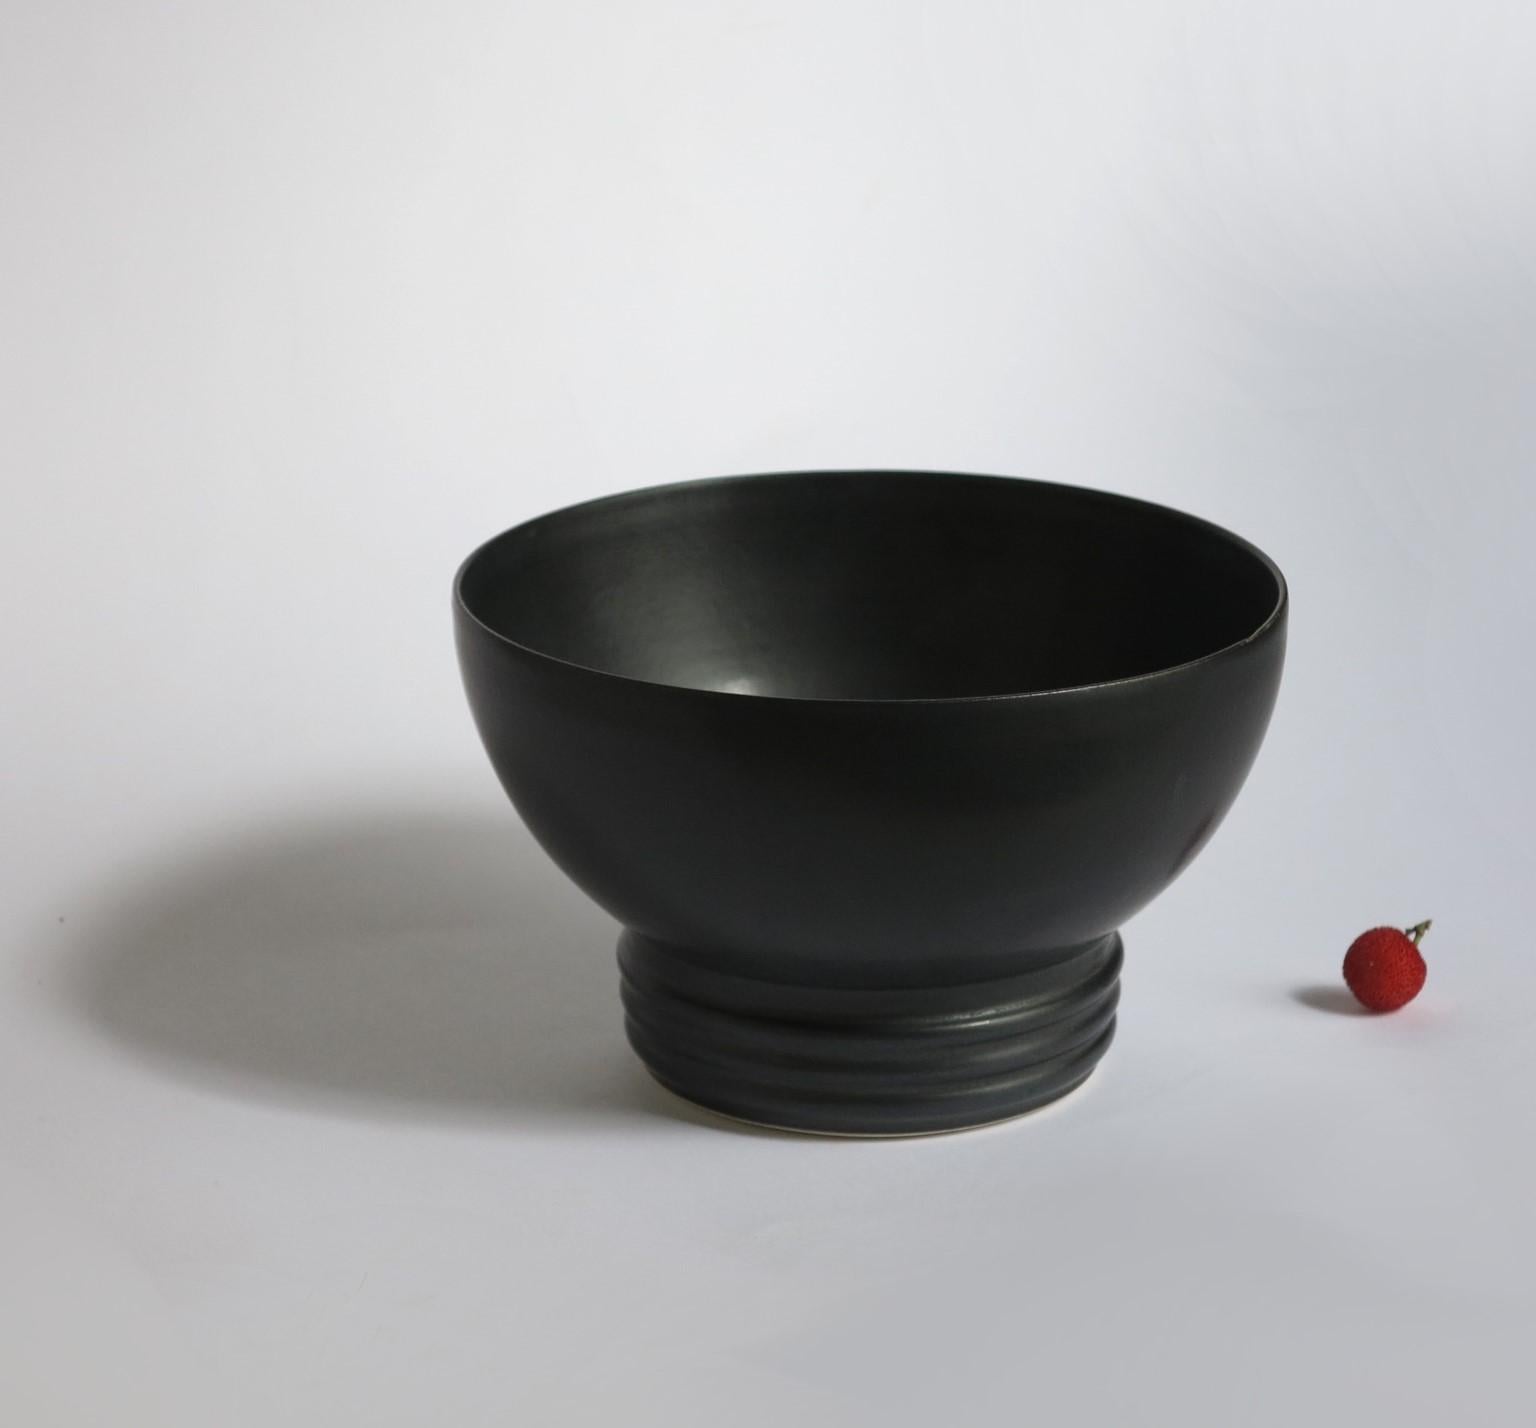 Grand bowl noir by Cica Gomez
Dimensions: Ø 17.5 x H 11 cm
Materials: Stoneware


Usual objects. My work is first driven by the search for the line. The one that it draw when the object takes shape and place in space. That which delimits a